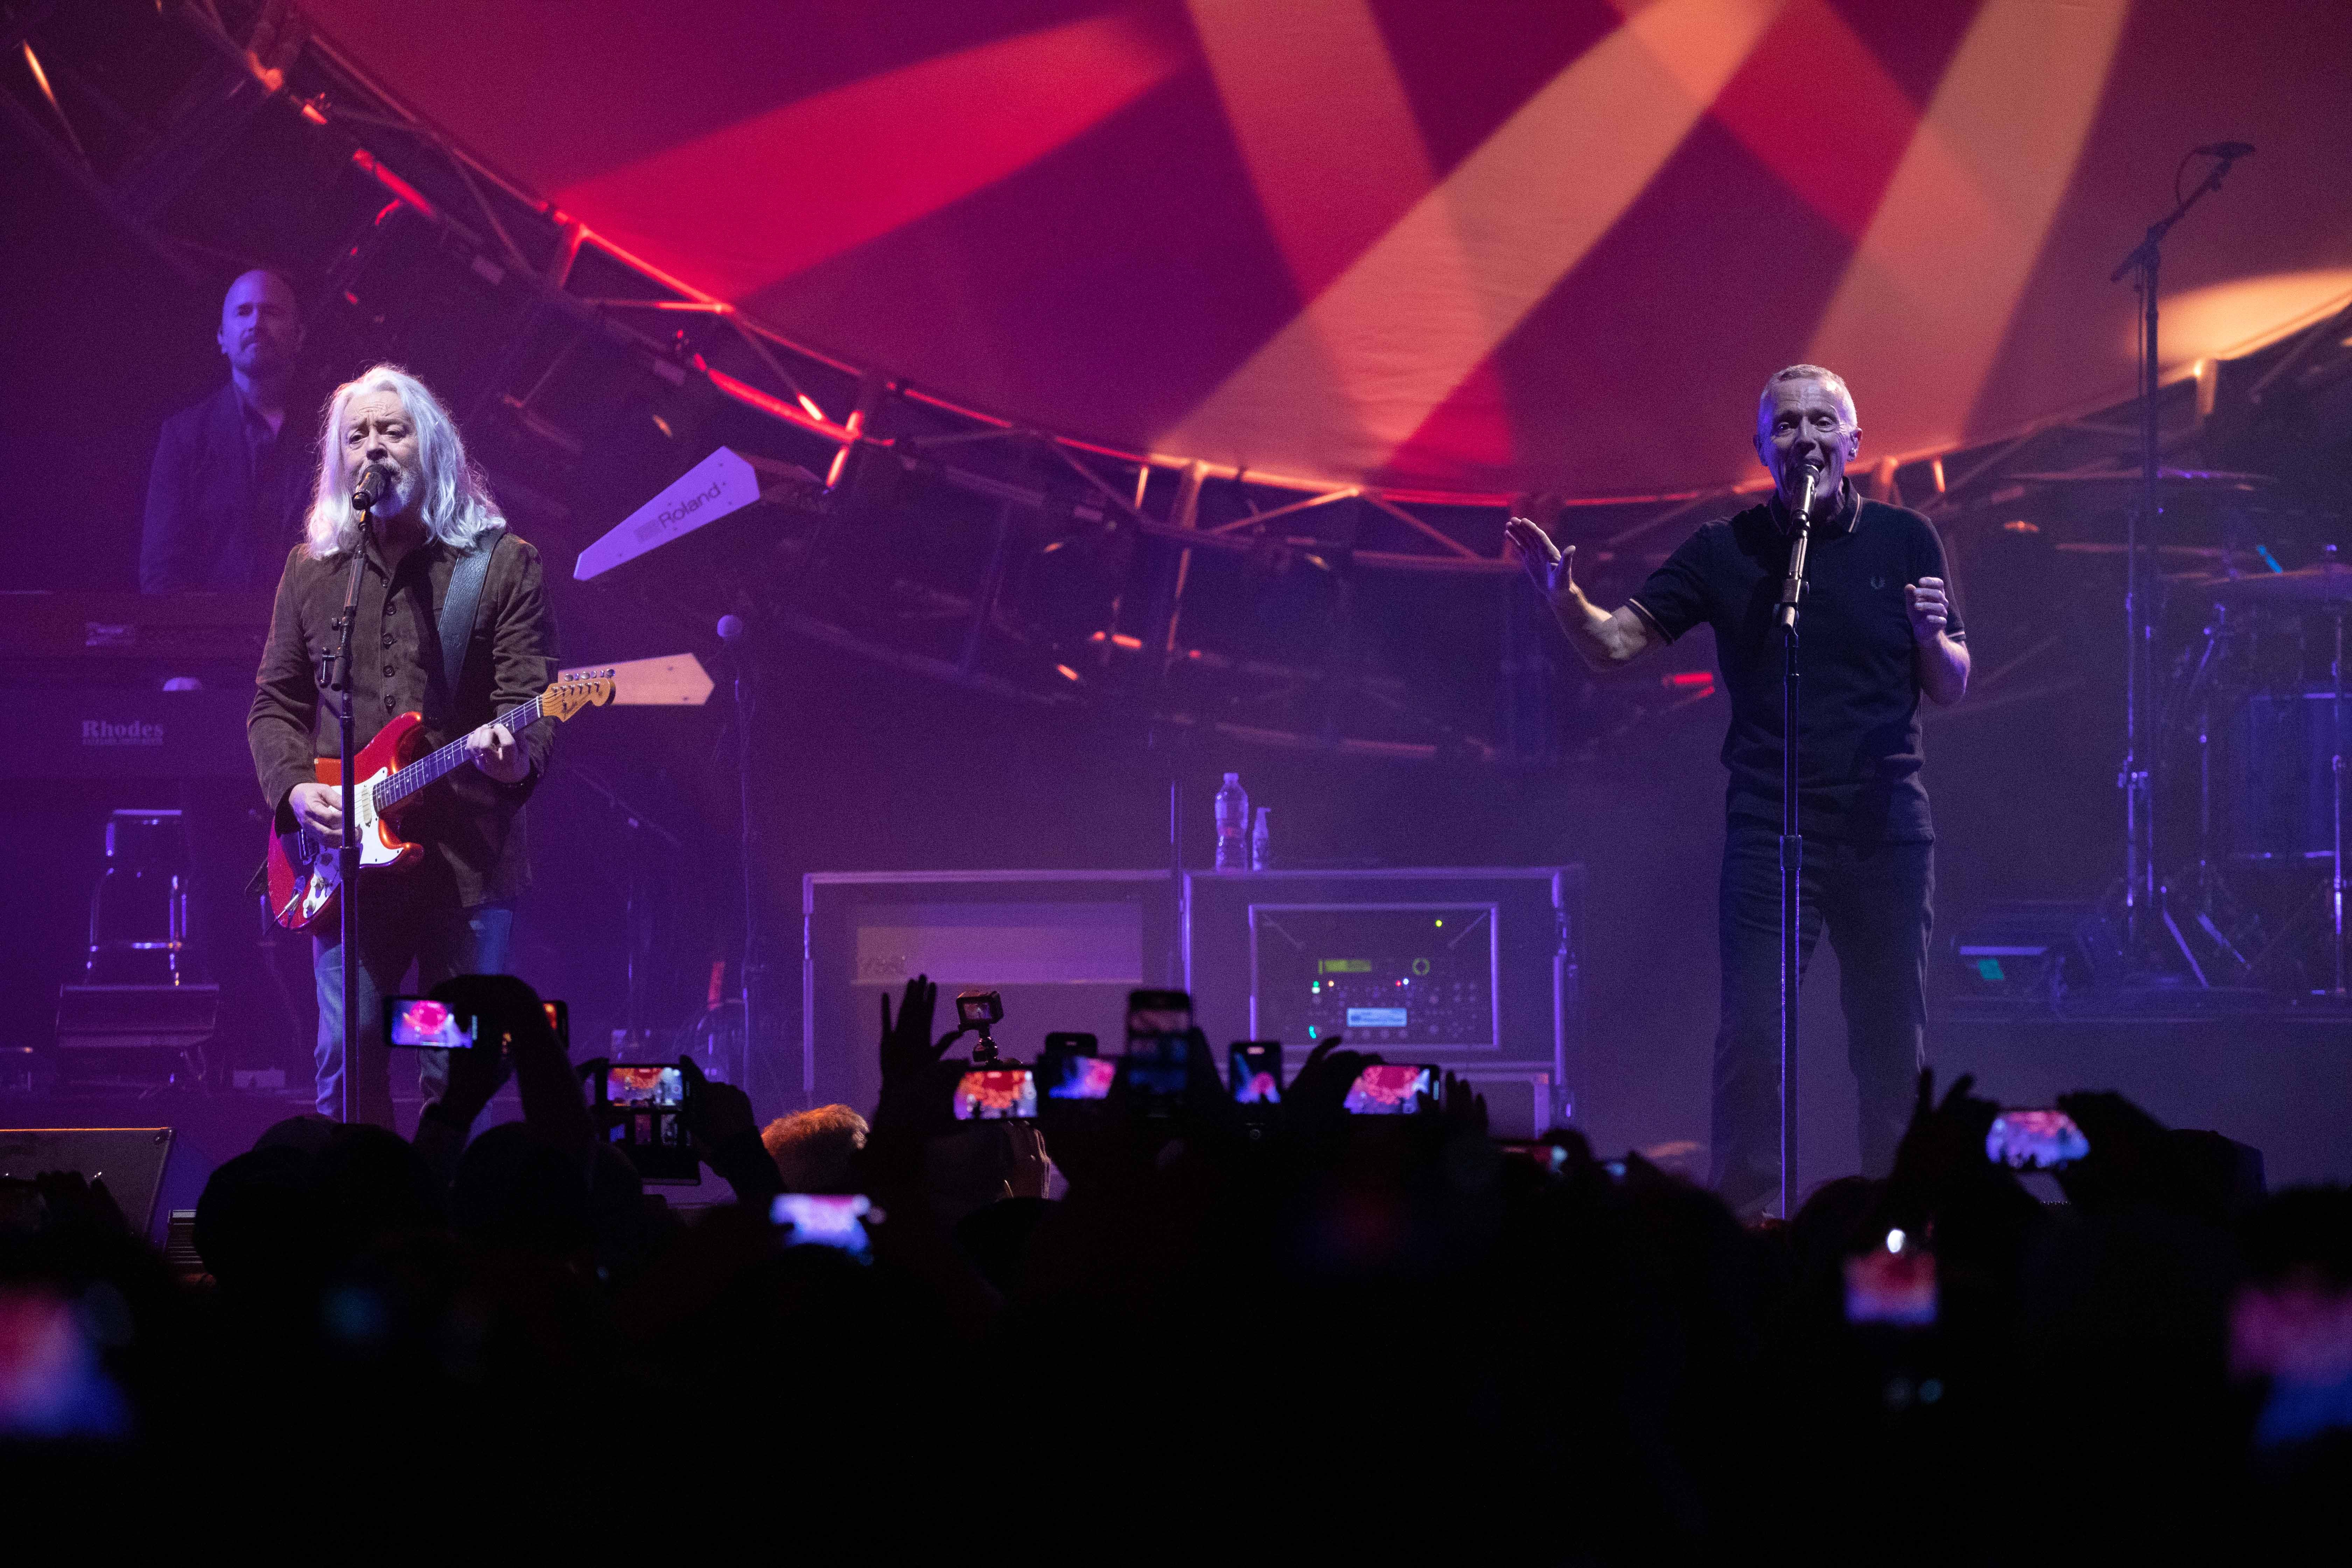 Tears for Fears returns to Israel as part of 2019 world tour